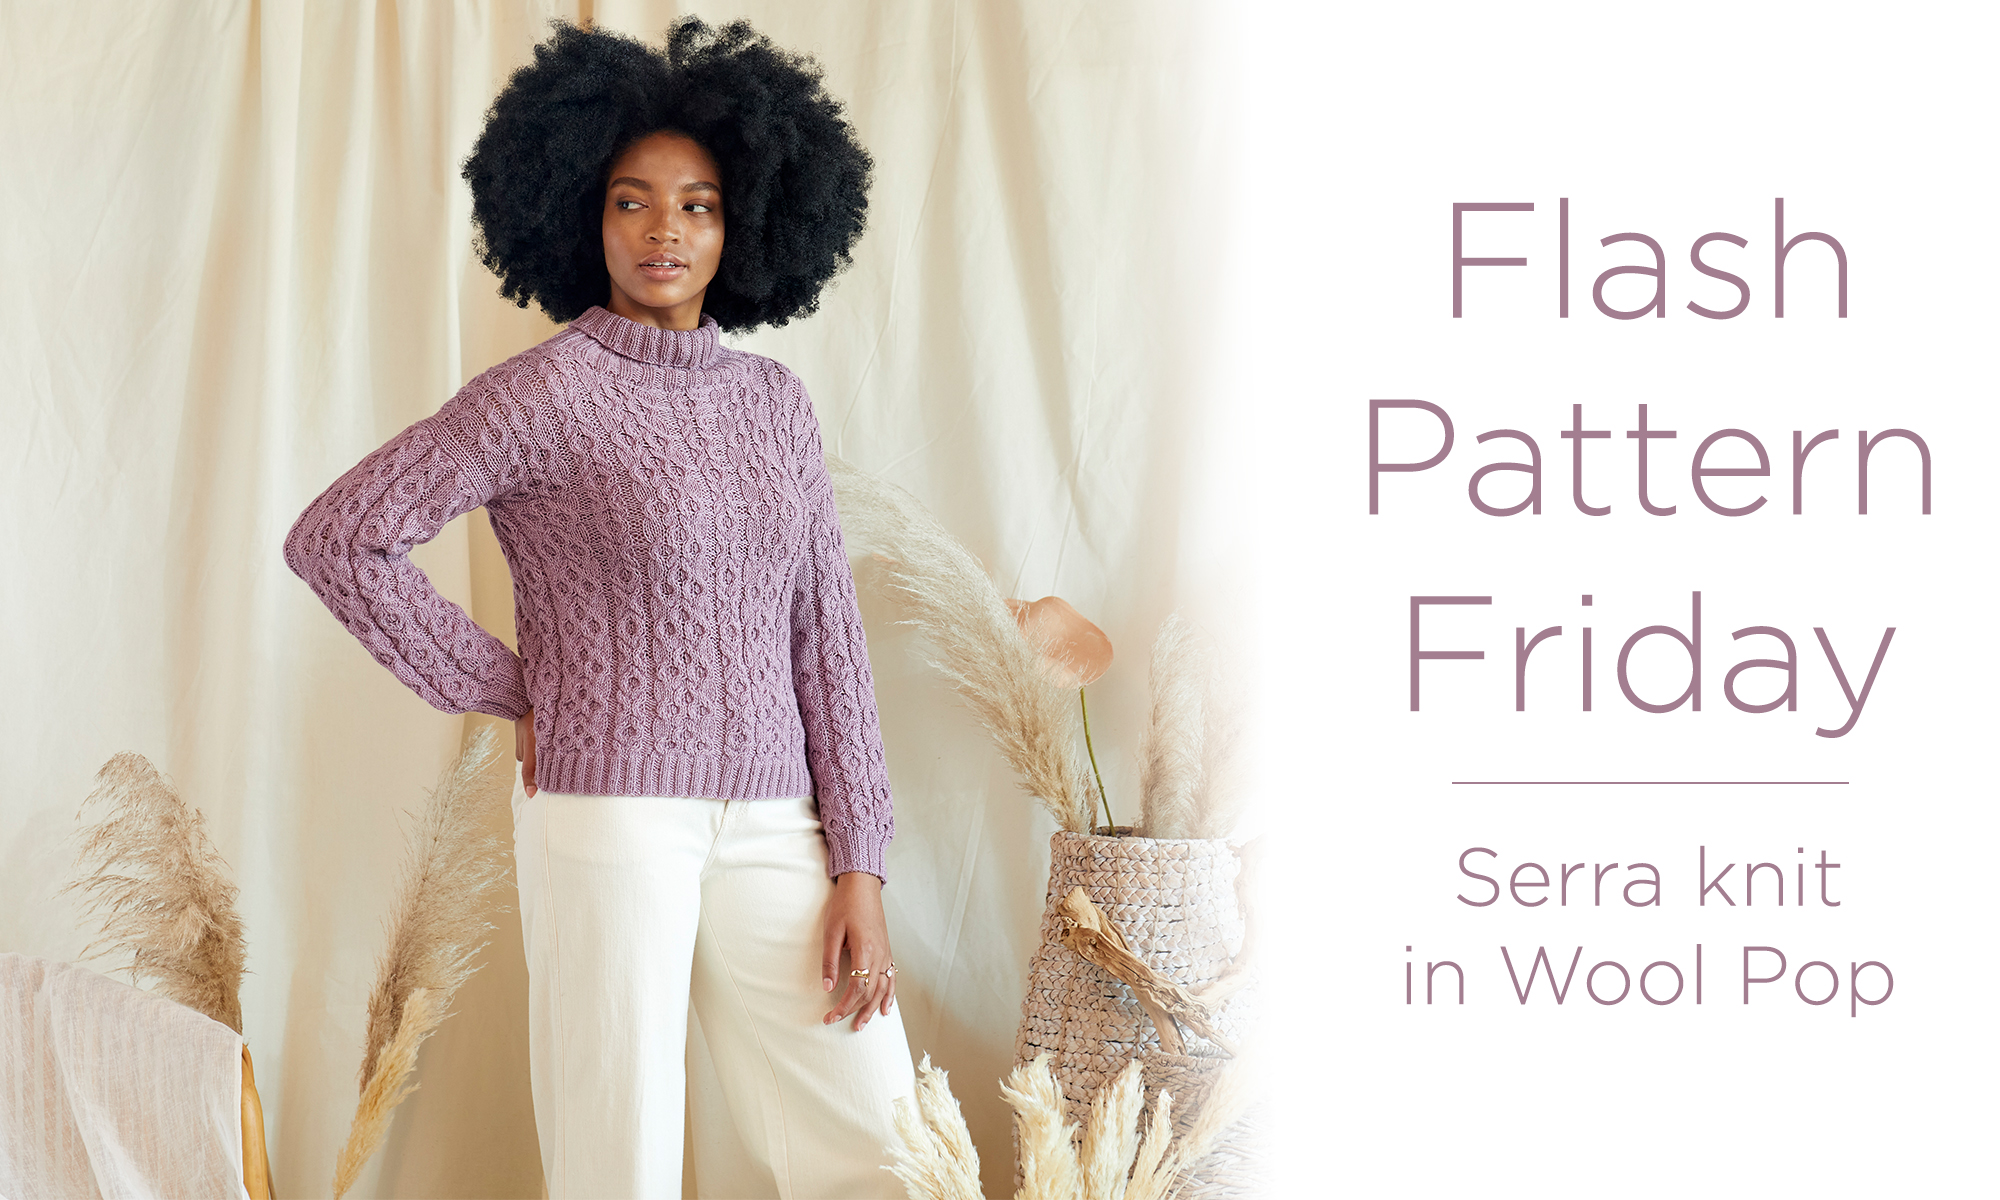 A woman poses in the Serra sweater. The text "Flash Pattern Friday, Serra knit in Wool Pop" appears to the right of her.